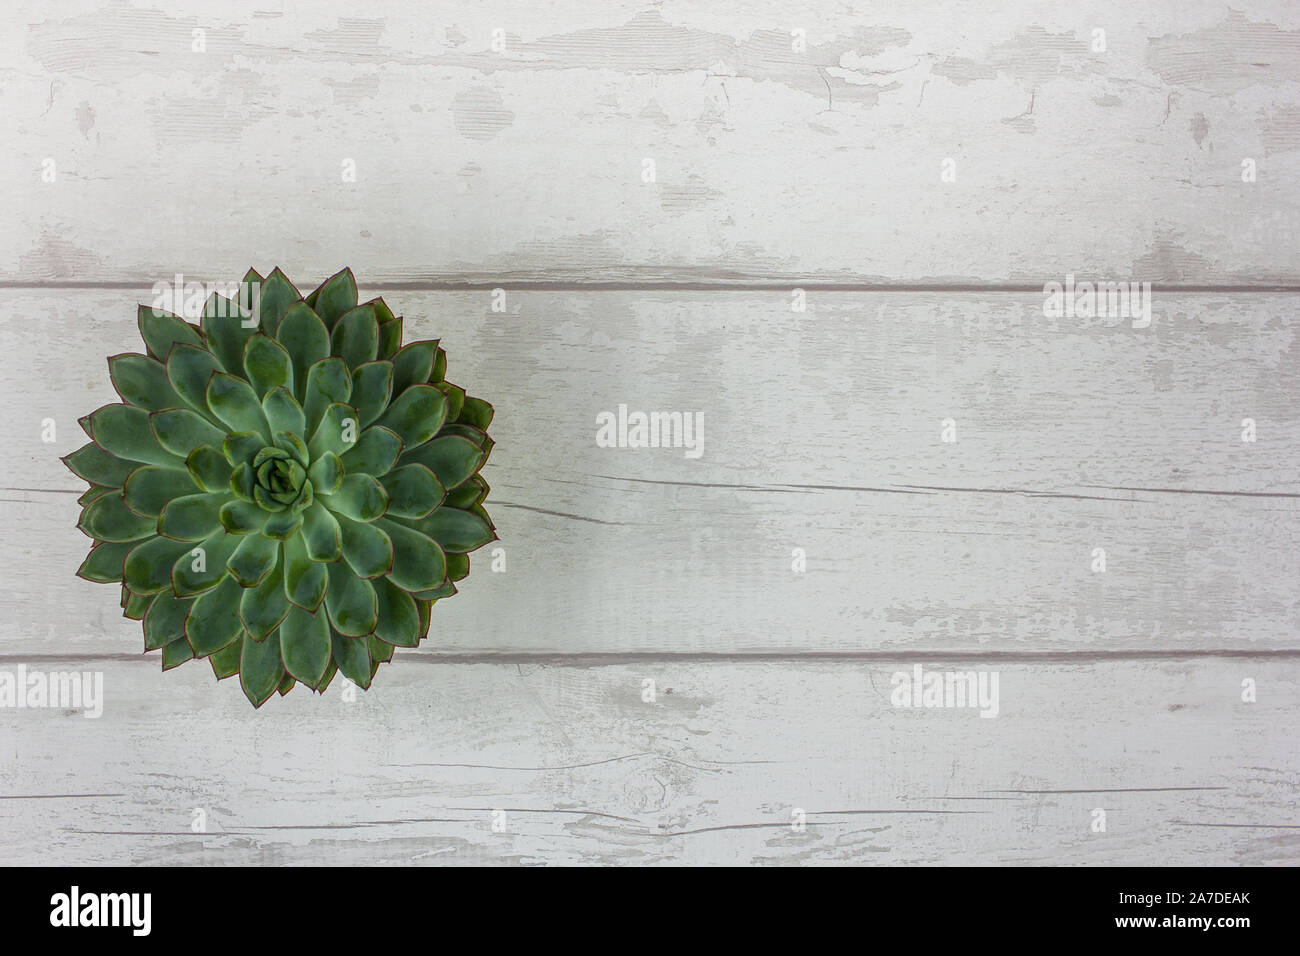 Top View of Beautiful Green Succulent Plant on a Rustic White Wooden Table Stock Photo